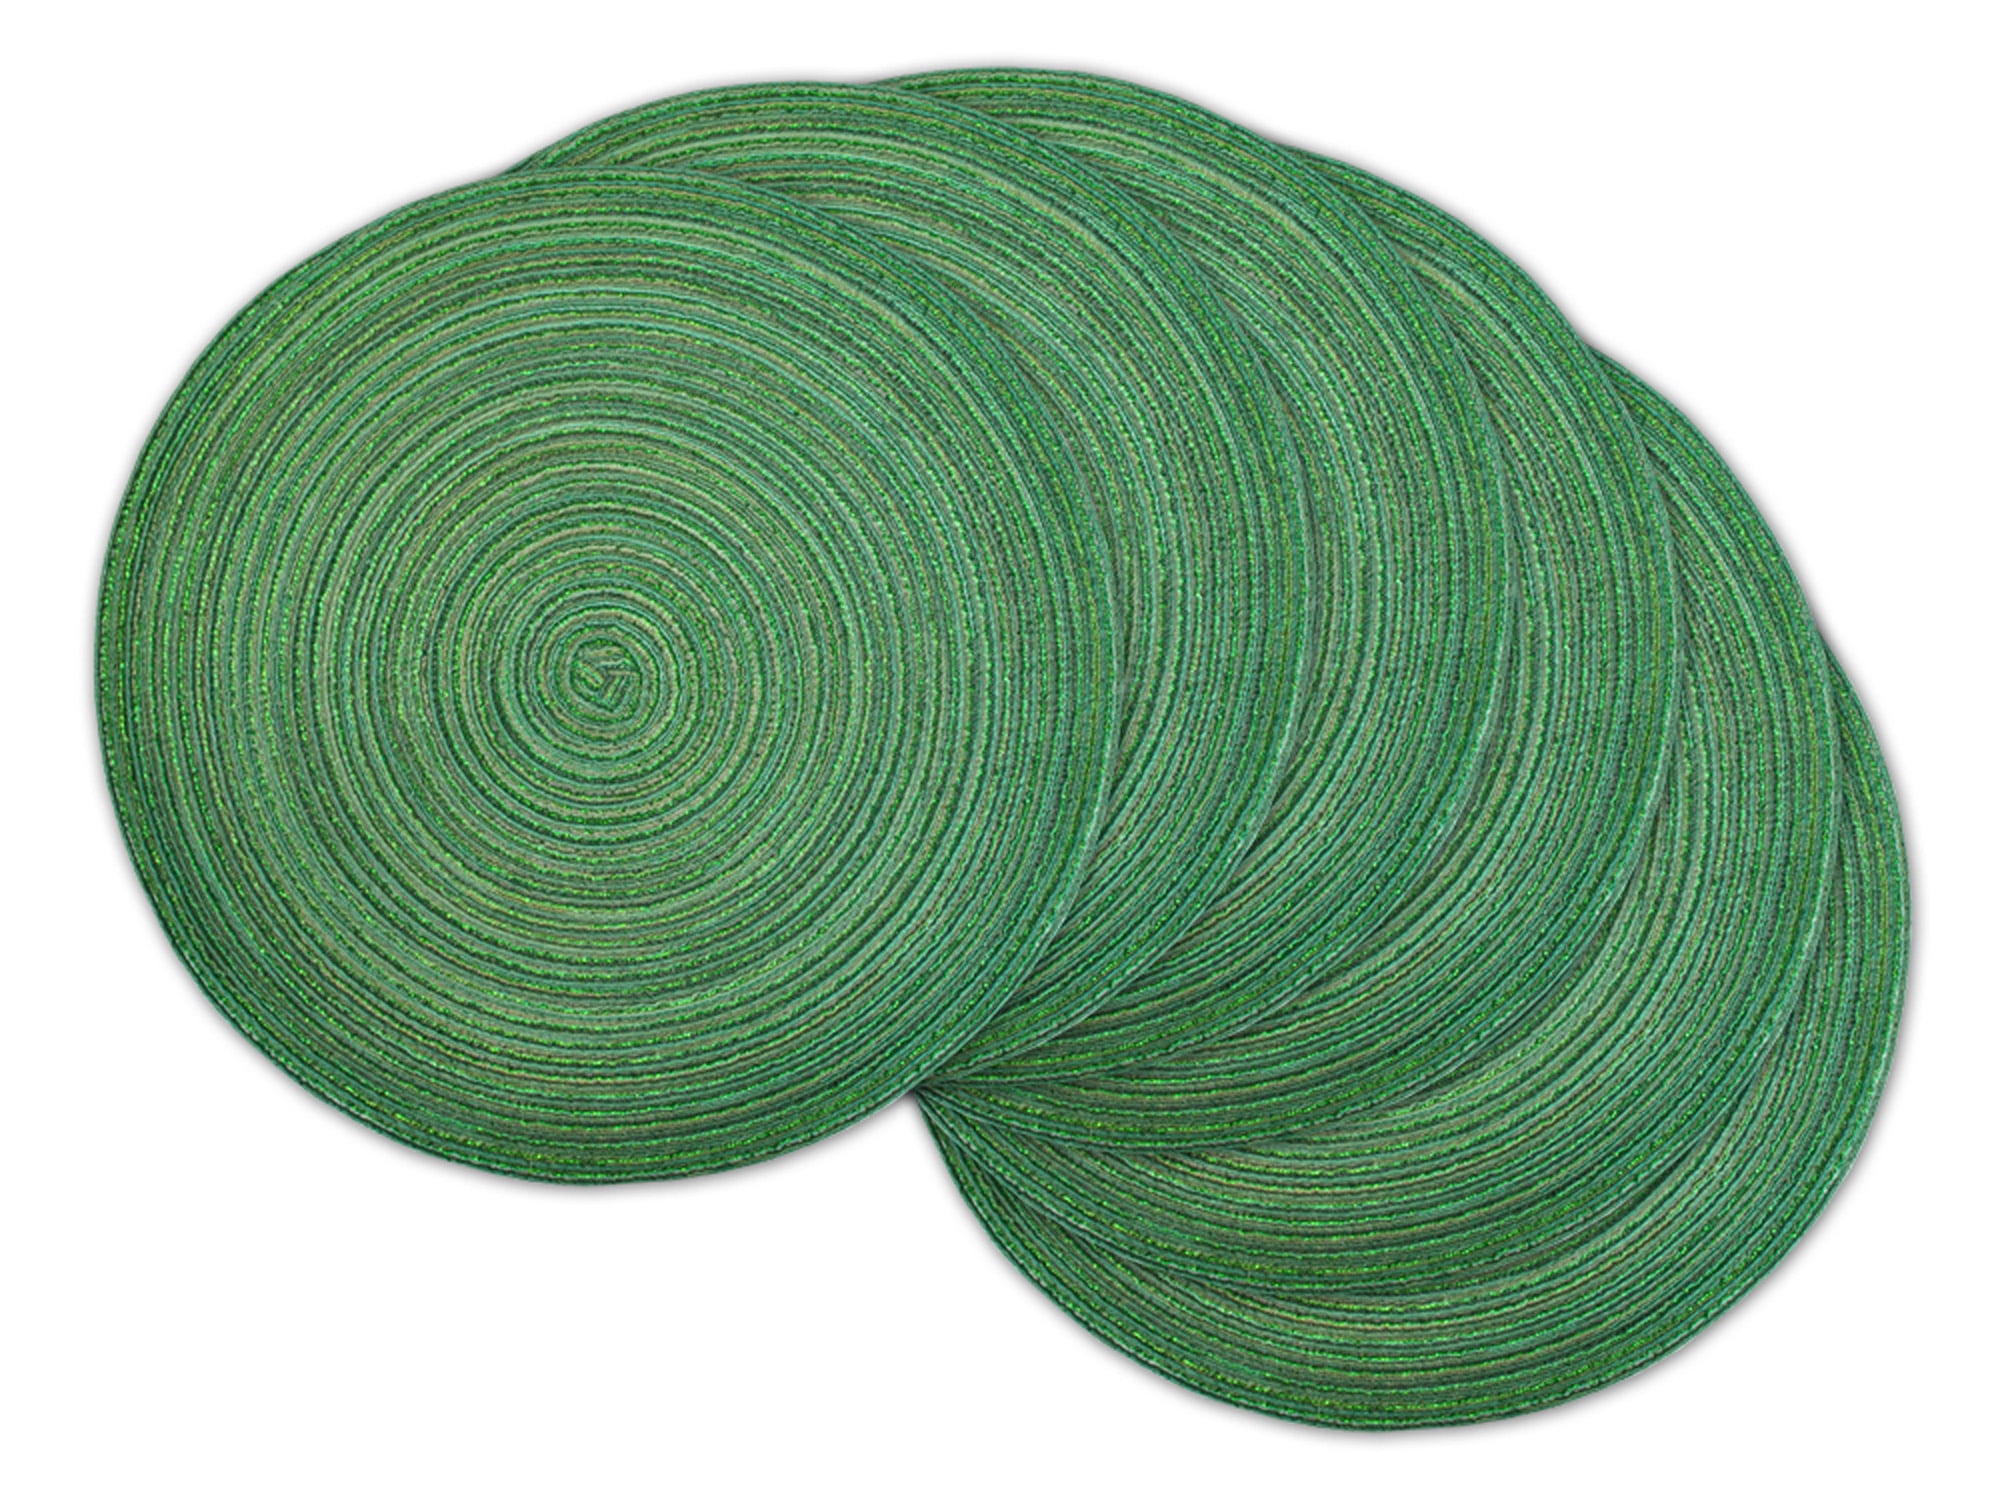 Green table placemats